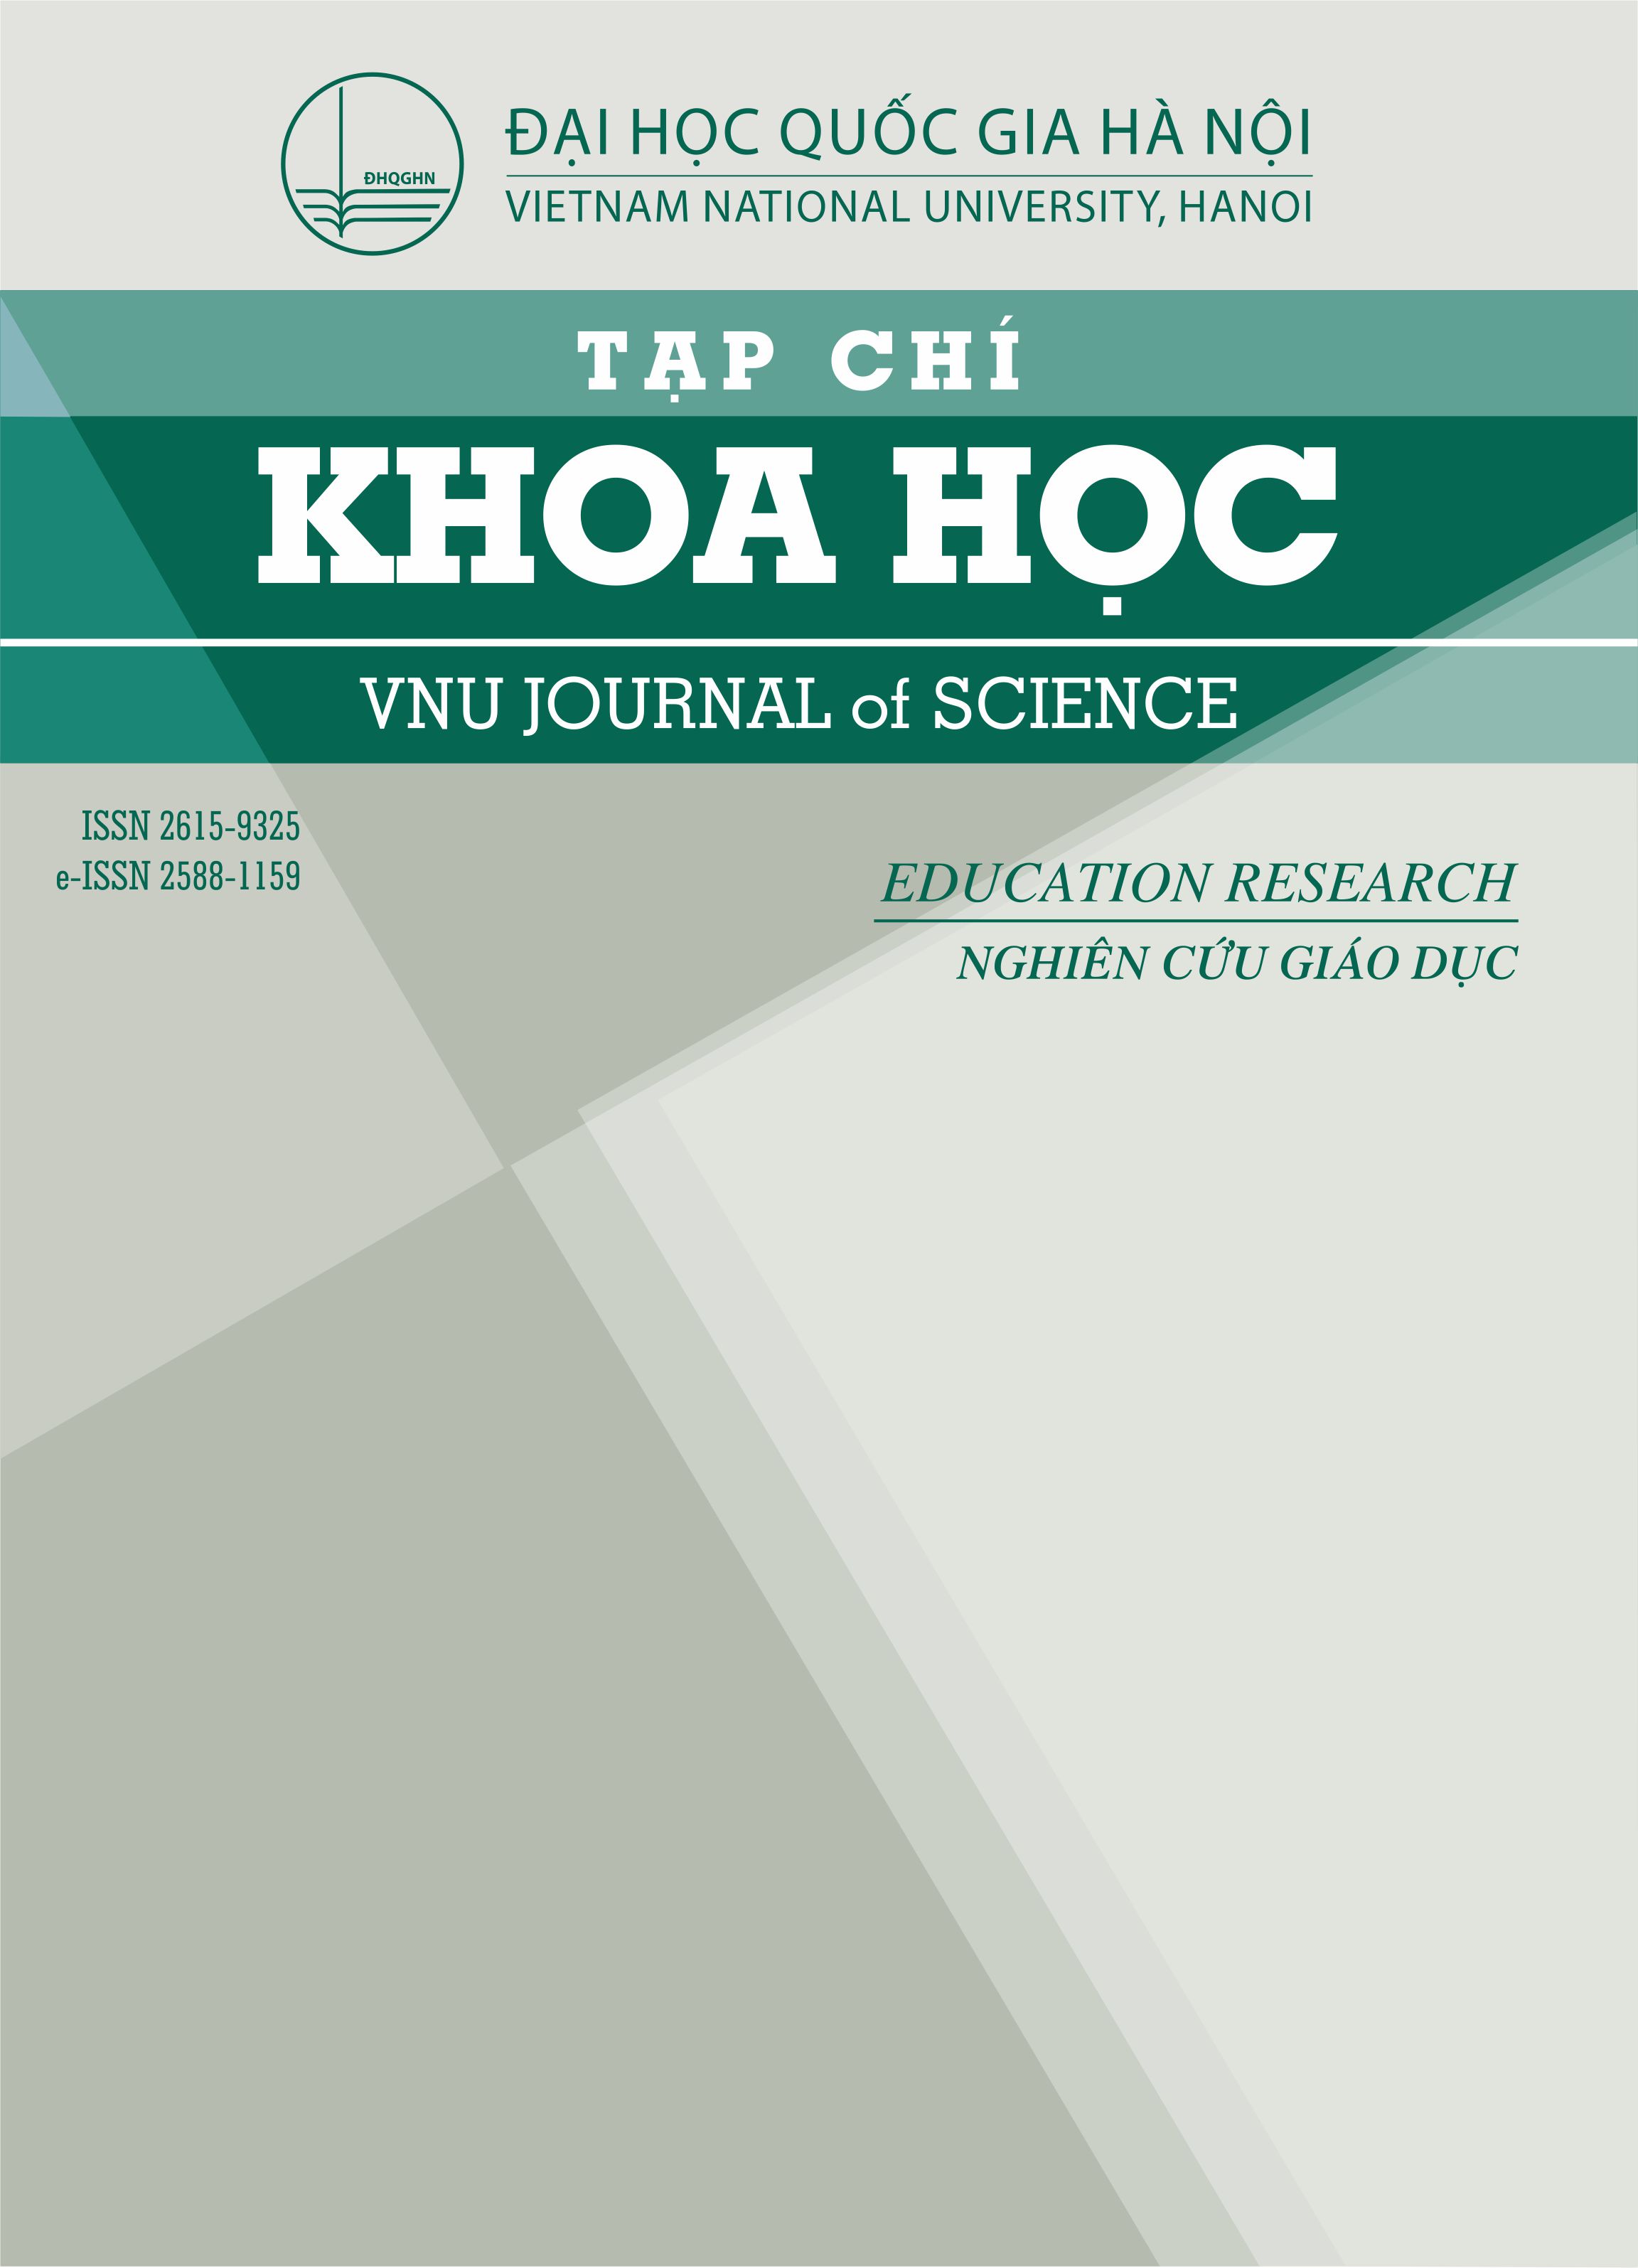 VNU Journal of Science: Education Research